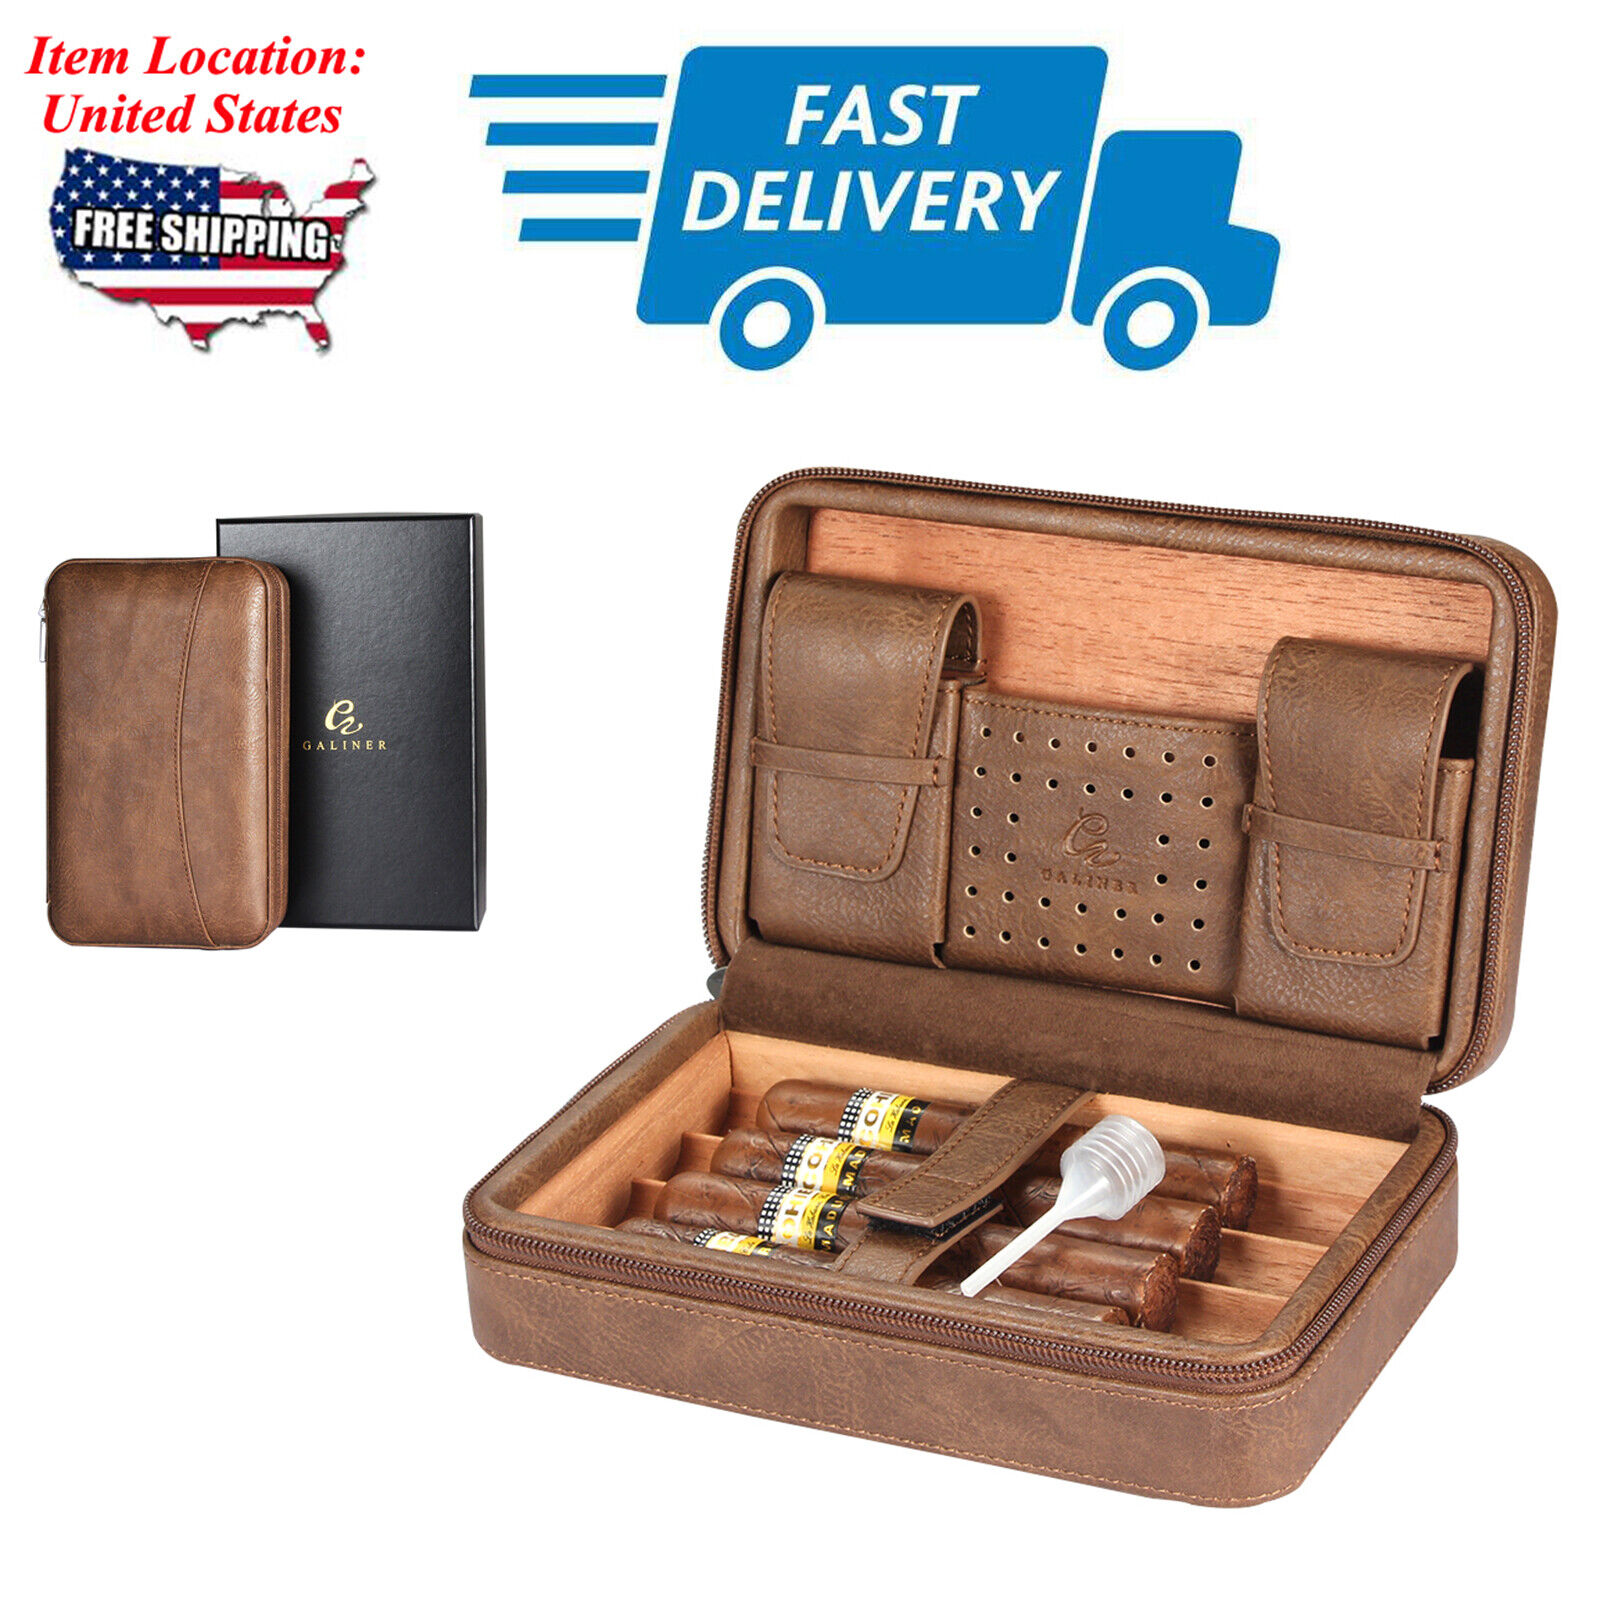 Galiner Travel Leather Cigar Humidor Case Cedar Lined Hold 4ct W/ Gift Box Brown